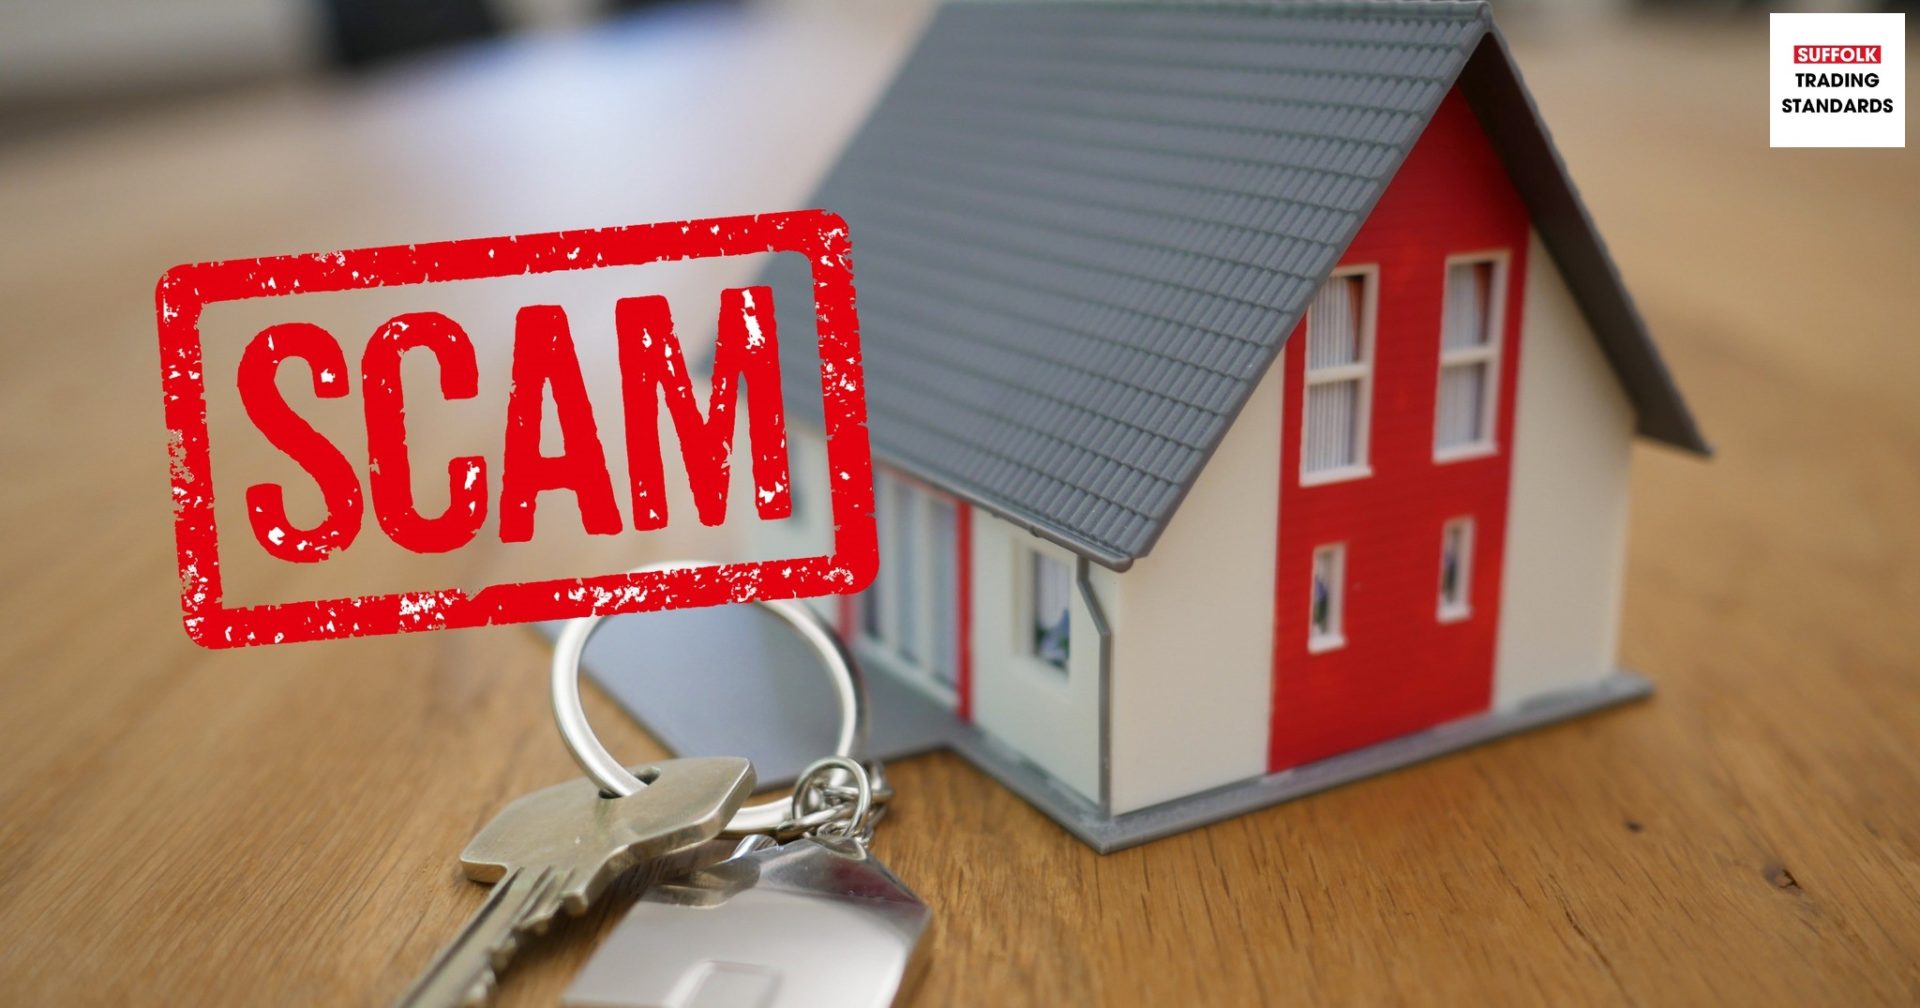 Suffolk Trading Standards Home Rental Scam house Image